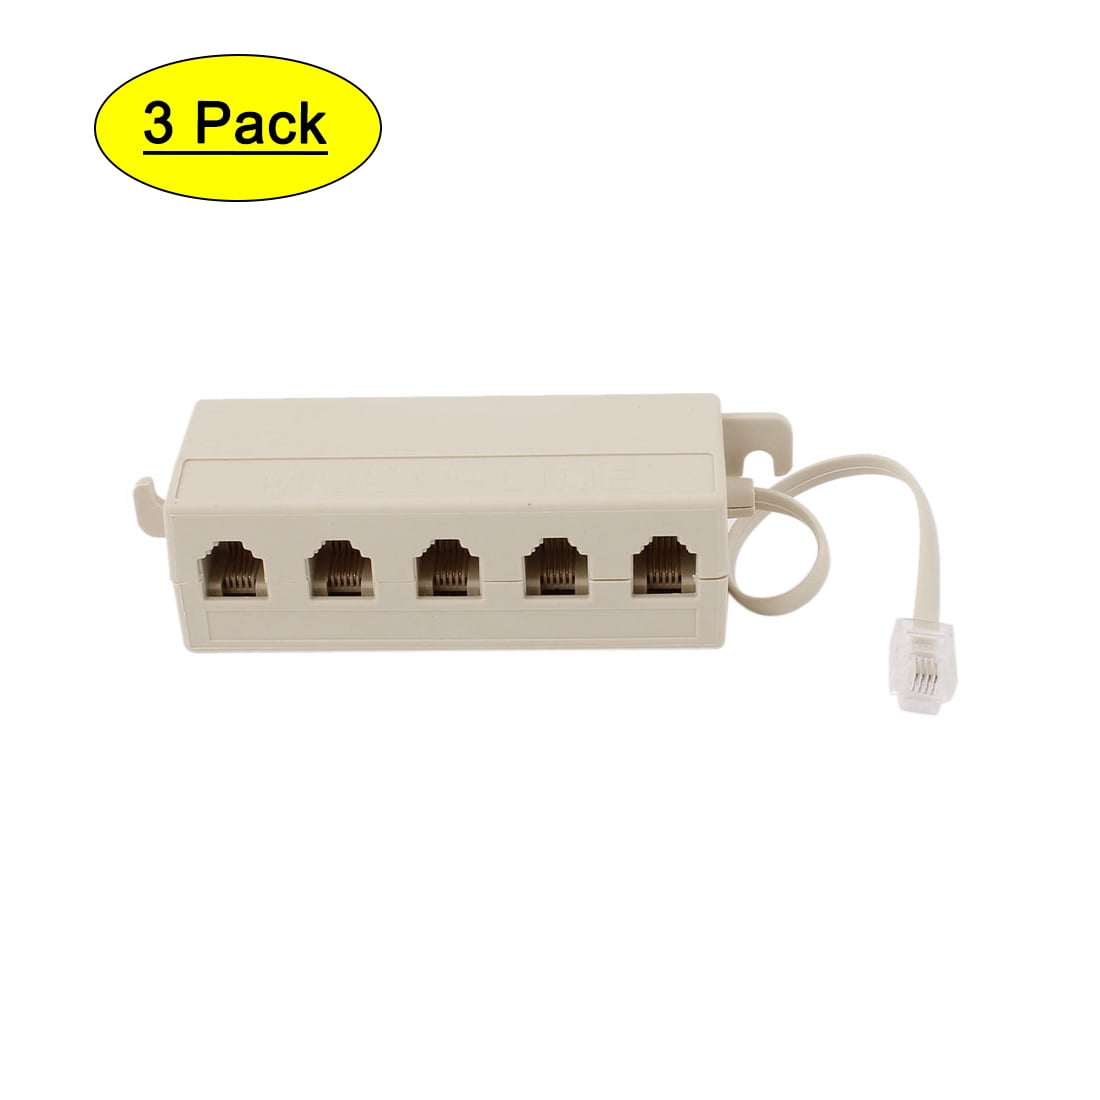 ADAPTER IVORY TELEPHONE LINE 2 WAY SPLITTER 1 MALE 2 FEMALE CONNECTION 3 PCS 